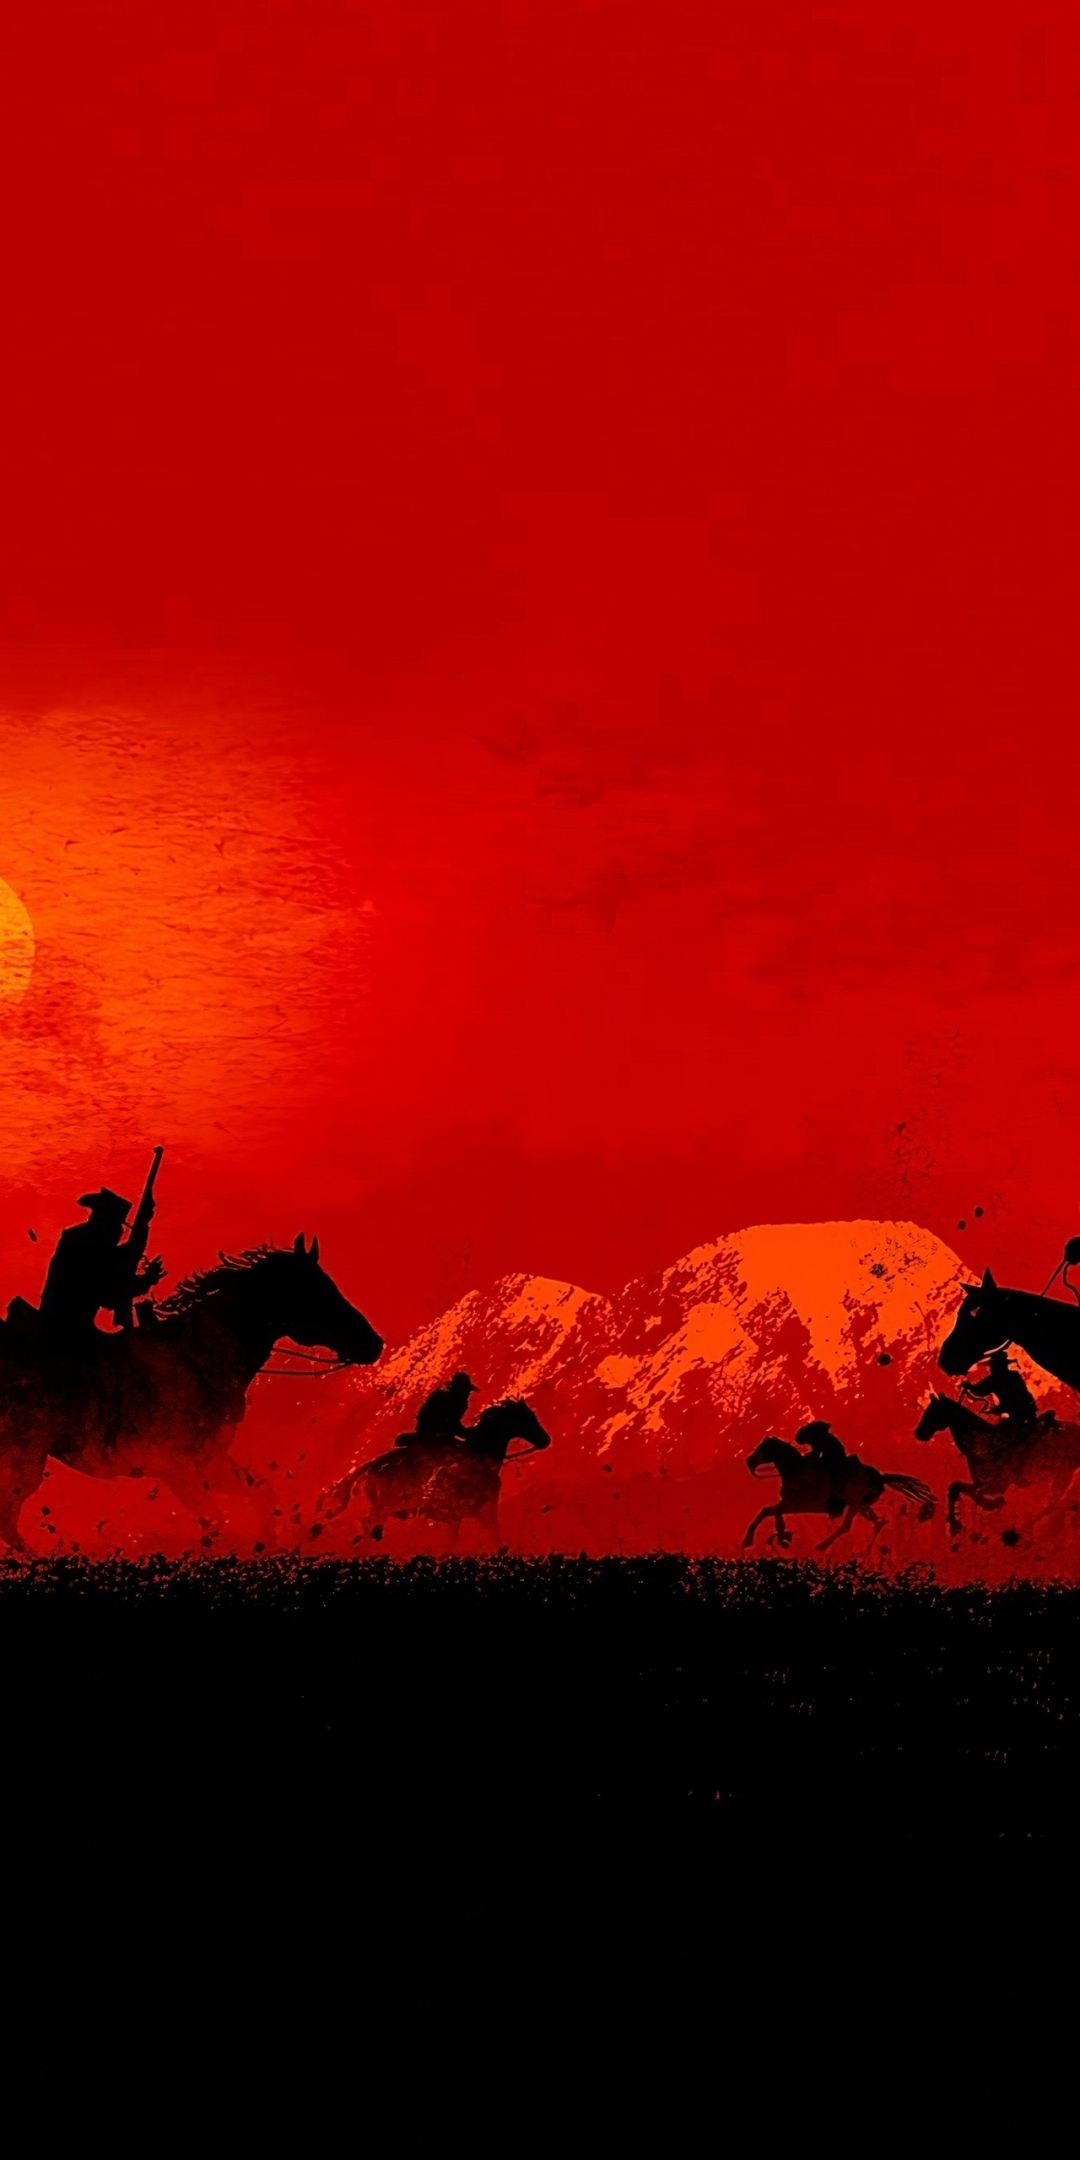 Red Dead Redemption 2, cowboys, game, 2019, 1080x2160 wallpaper